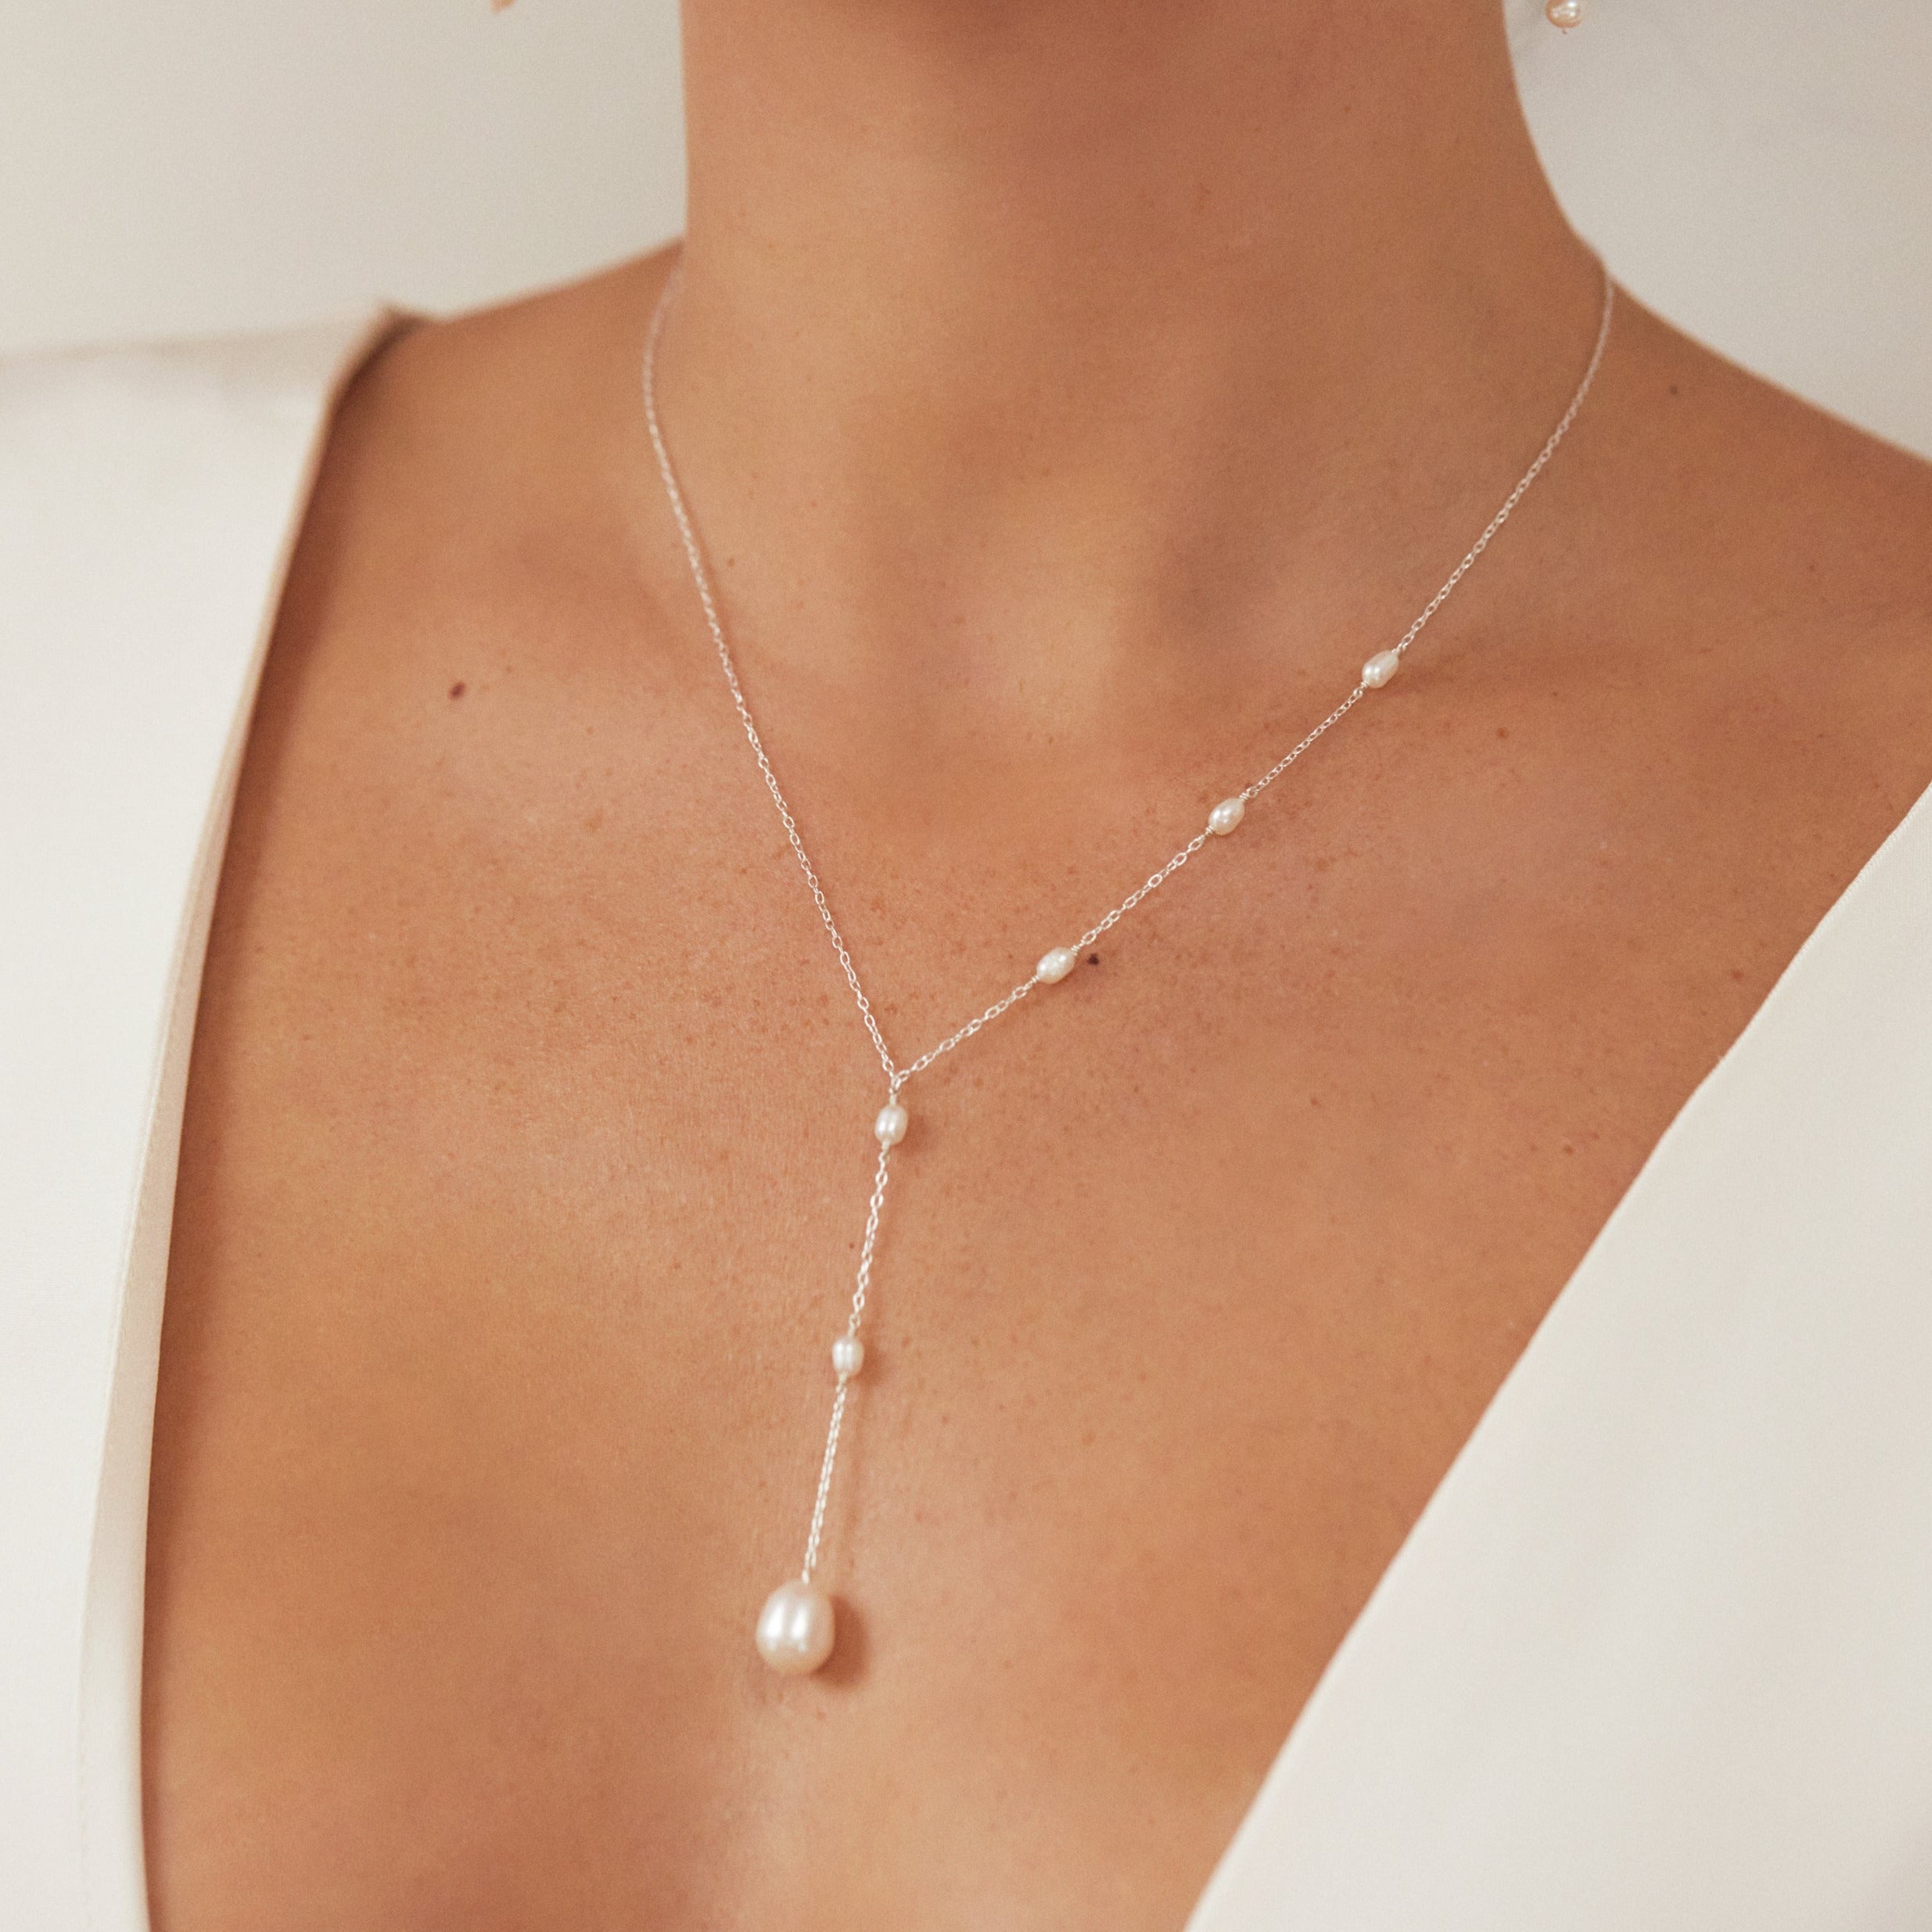 Silver seed pearl lariat necklace on chest around a neck